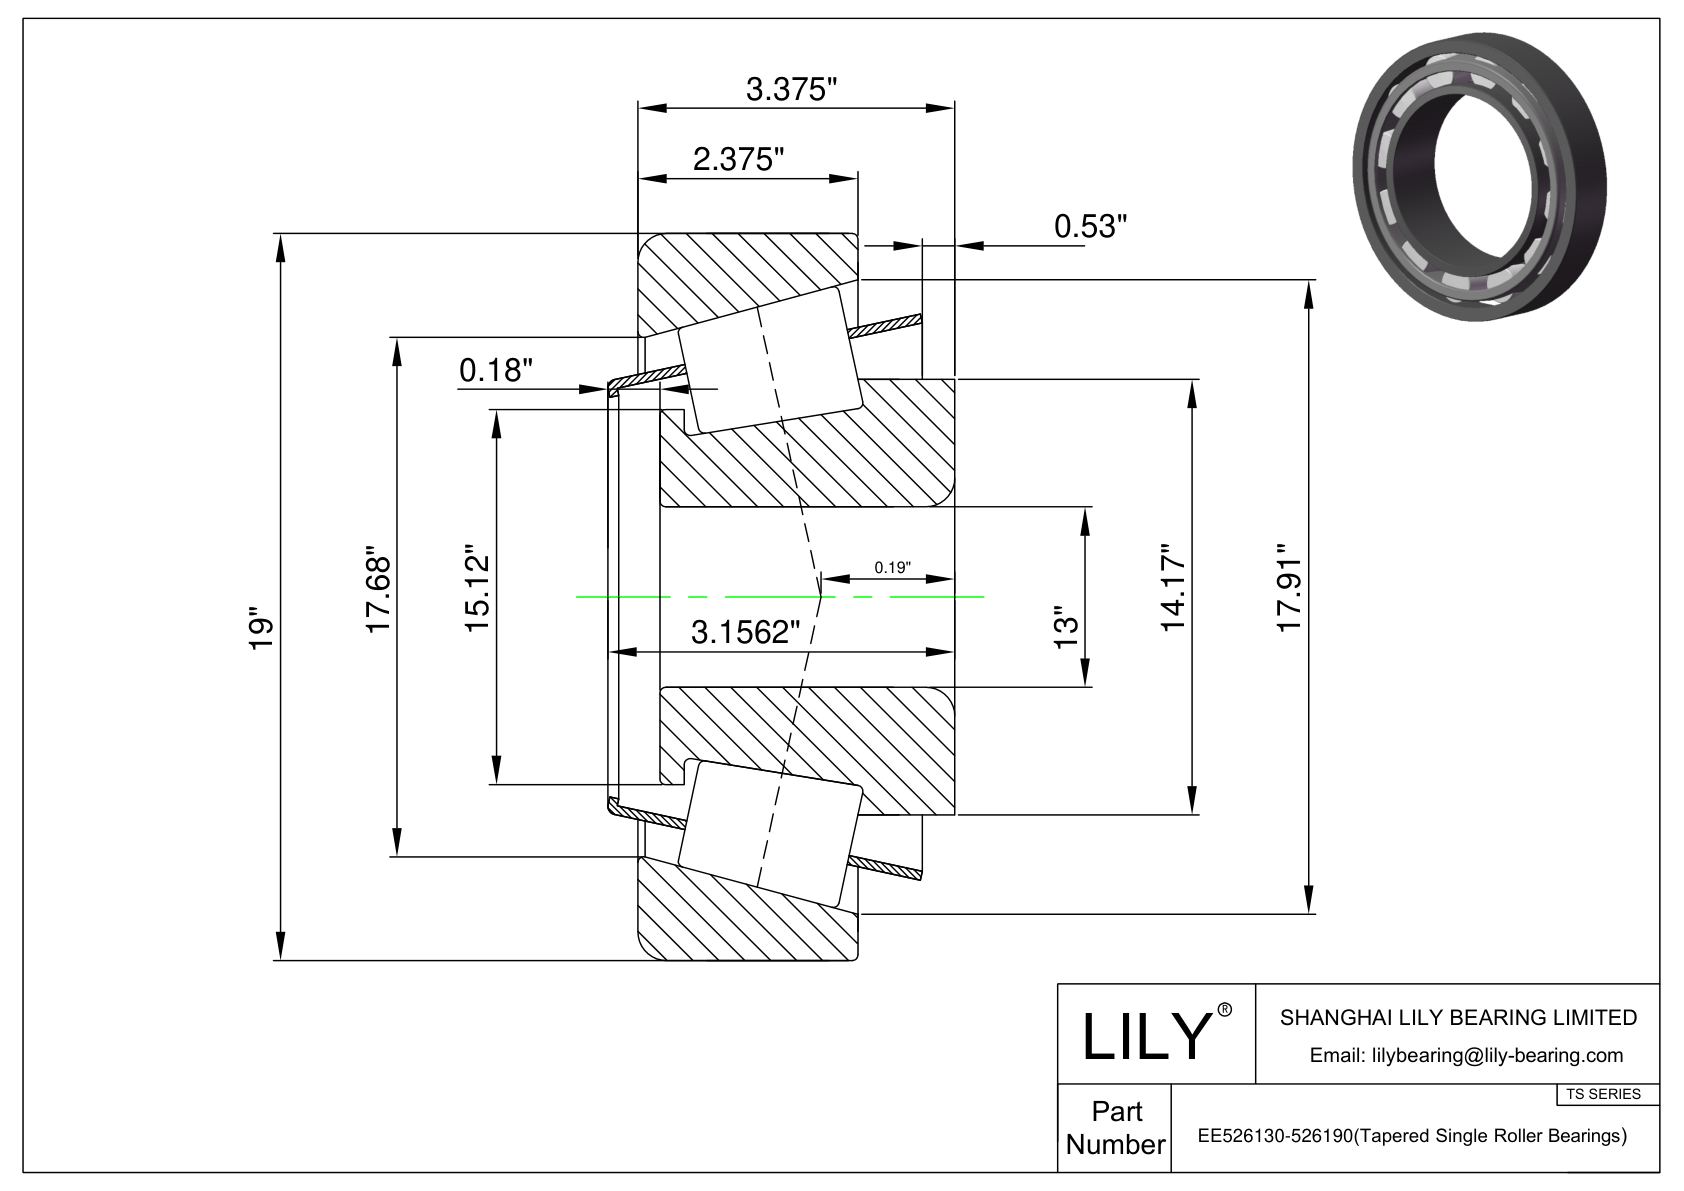 EE526130-526190 TS (Tapered Single Roller Bearings) (Imperial) cad drawing